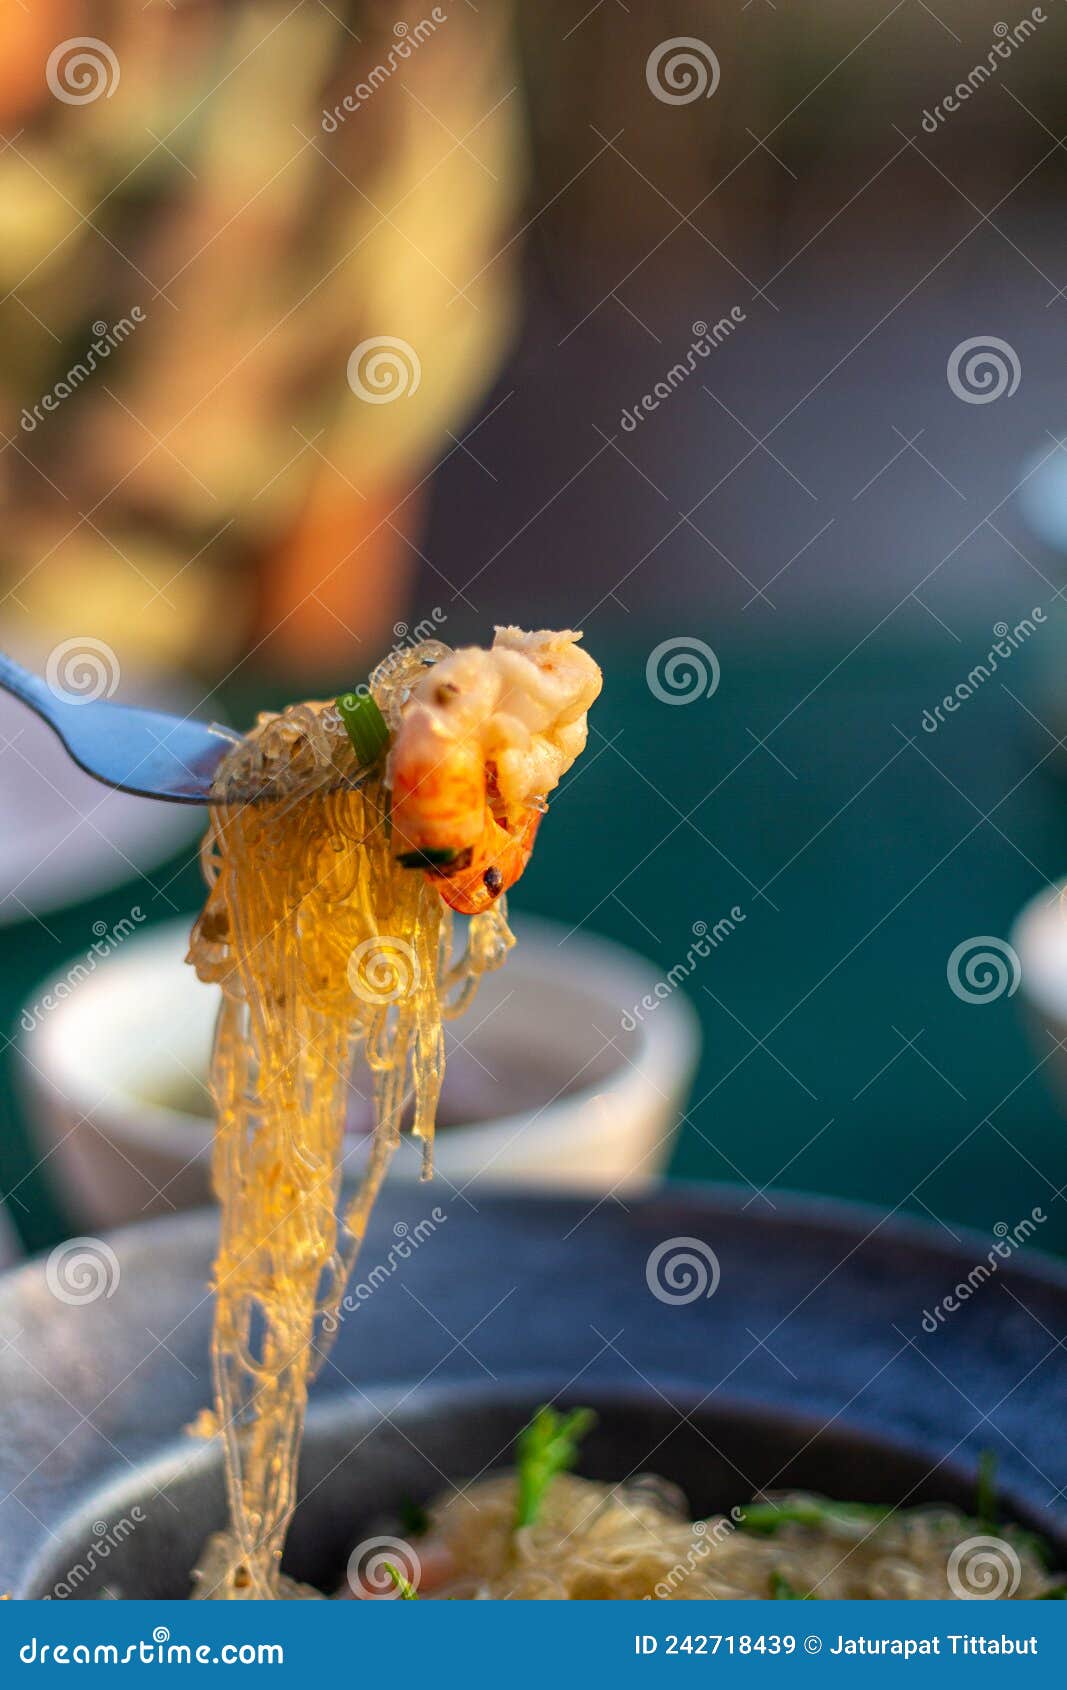 Steamed Prawns with Vermicelli Focus View Stock Image - Image of prawn ...